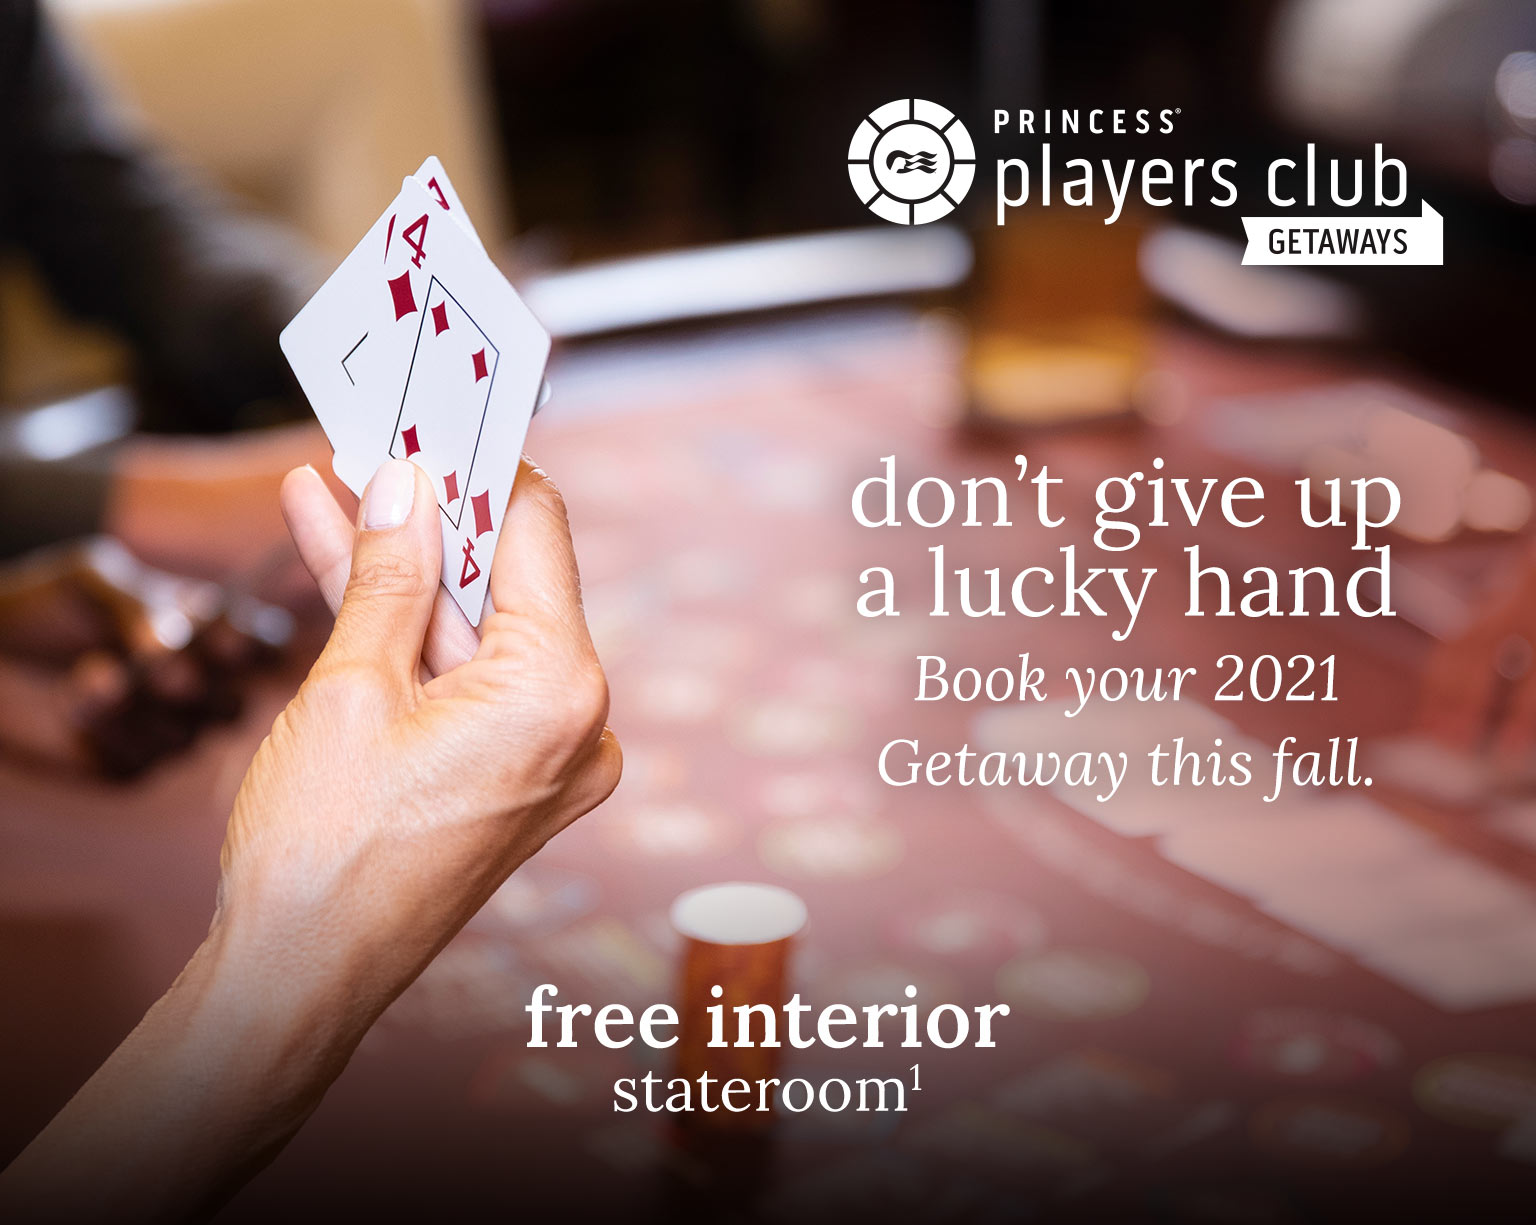 A man and a woman cheer at the slot machines - Princess Players Club Getaways - Don't give up a lucky hand, book your 2021 getaway! - free interior stateroom